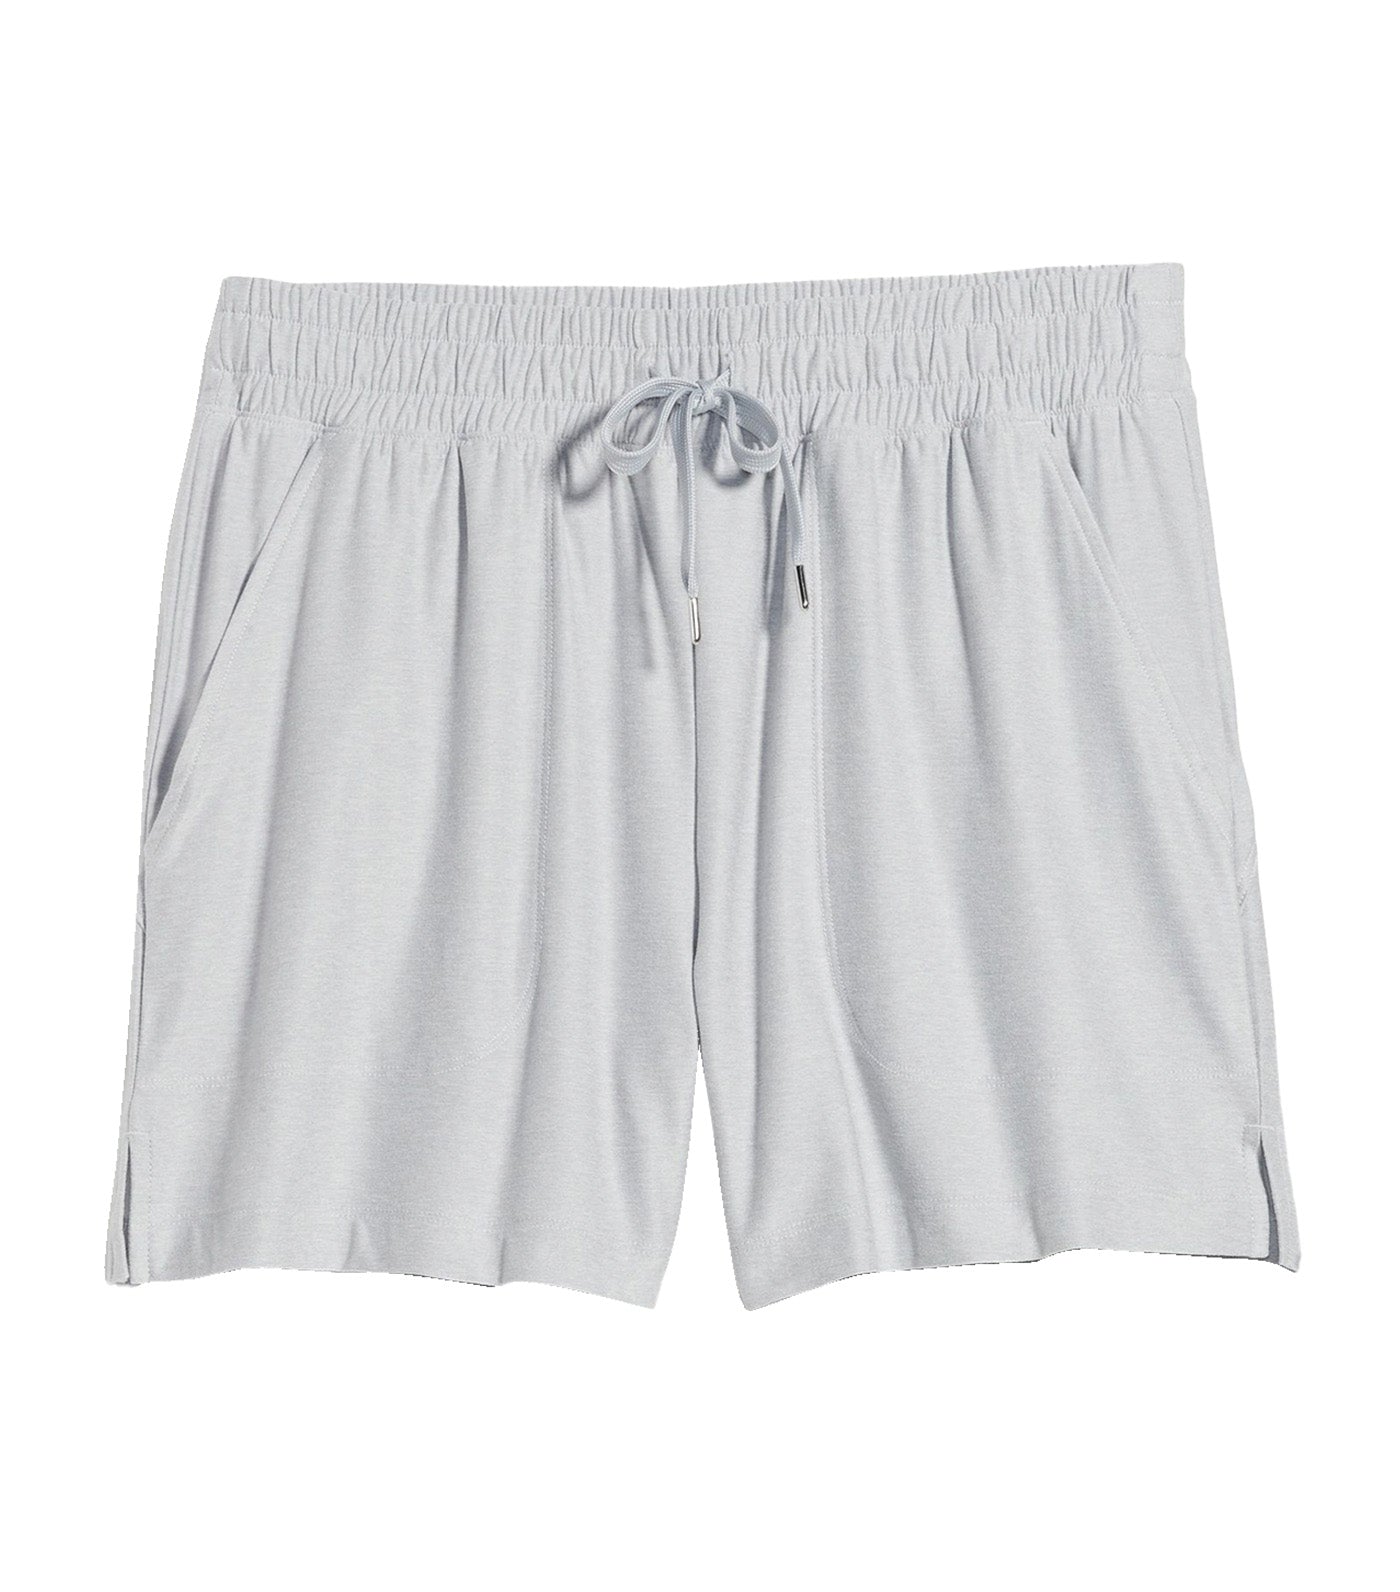 High-Waisted Cloud 94 Soft Sweat Shorts for Women - 4in Inseam Heather Gray